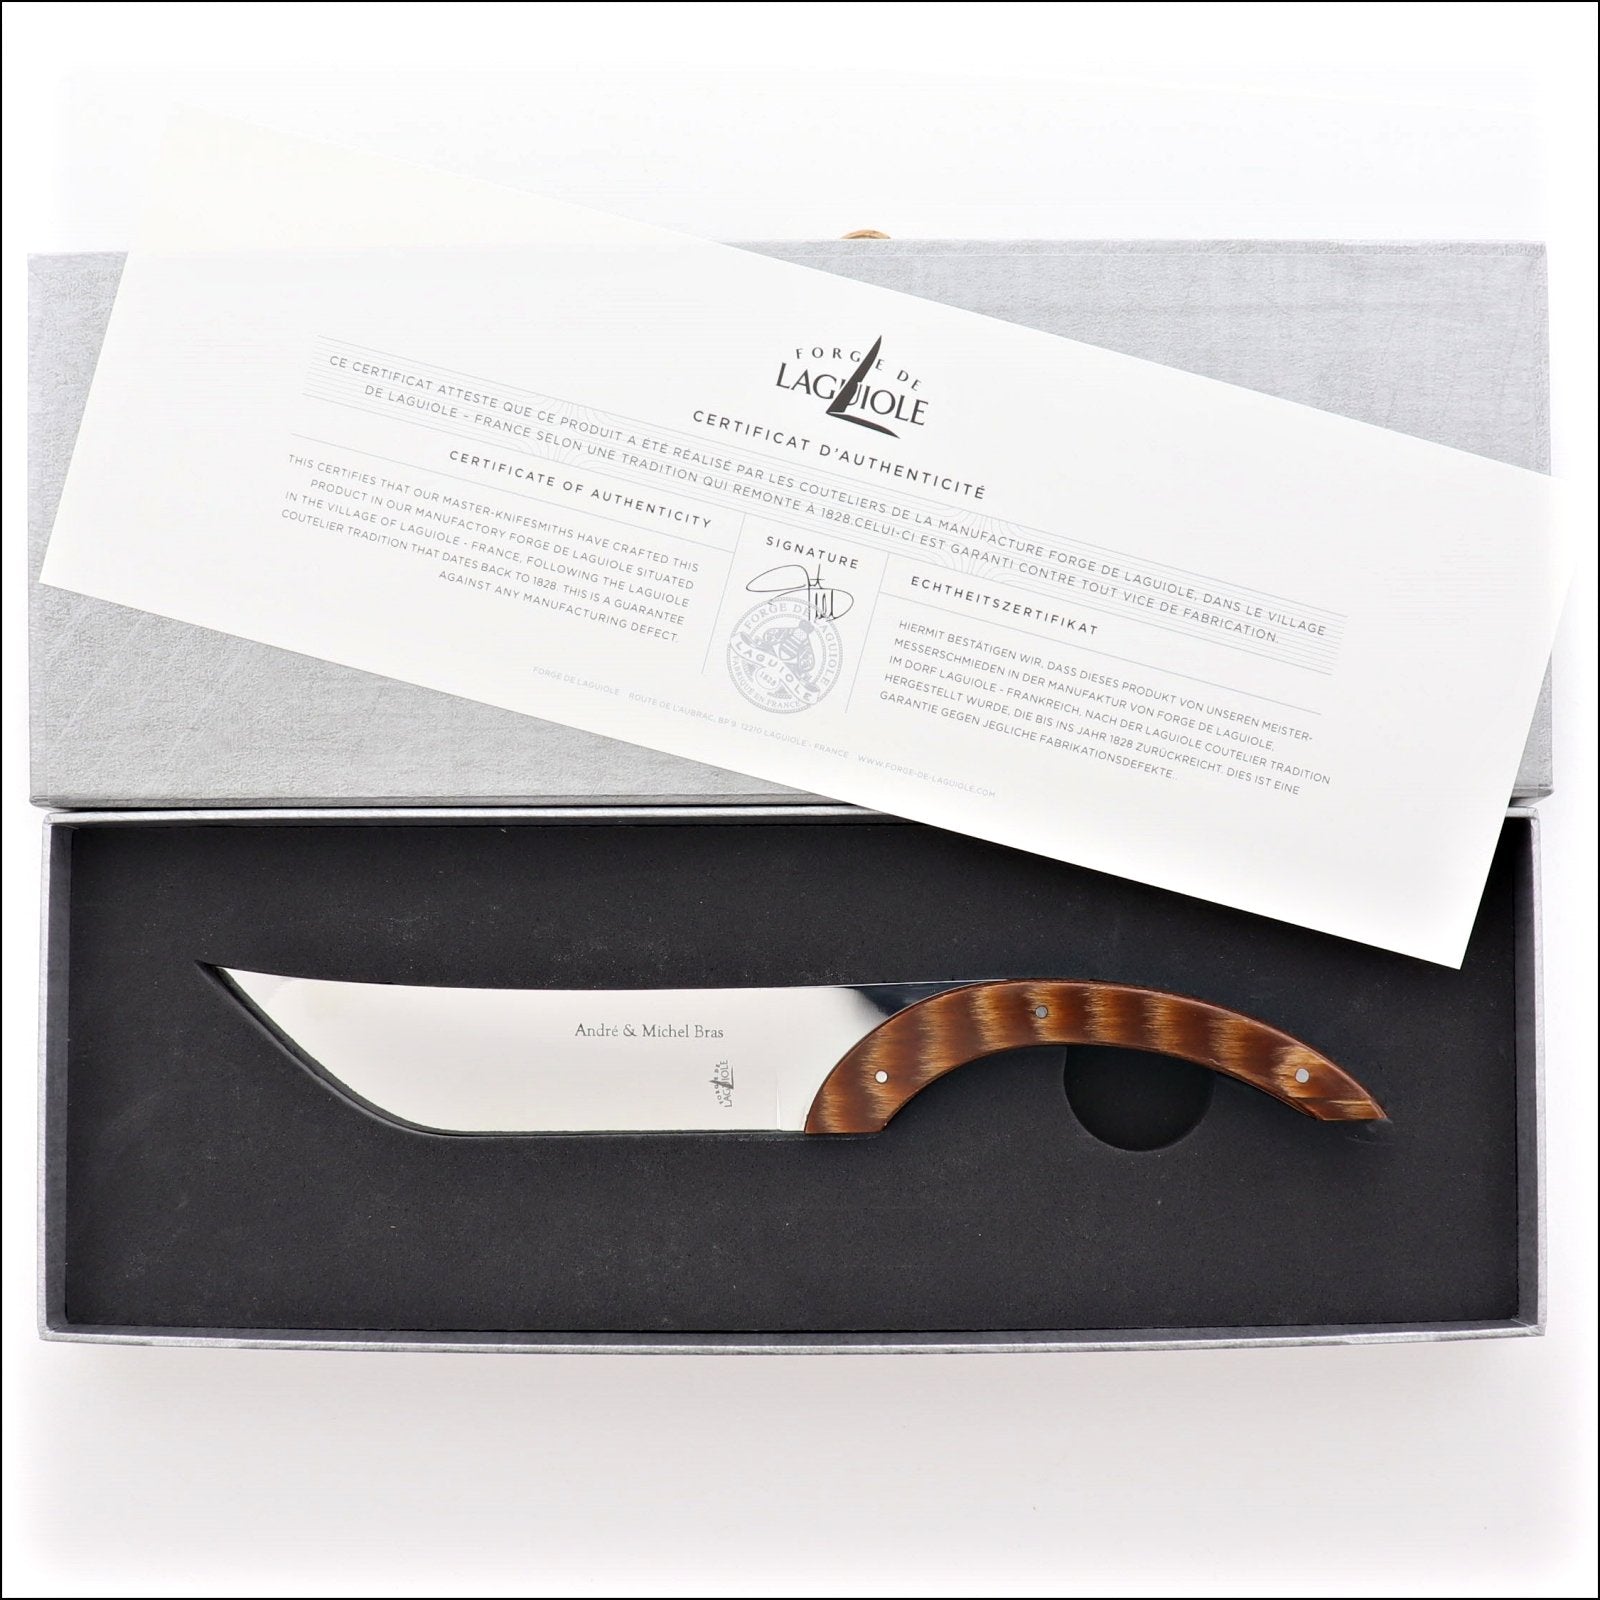 Cheese knife Michel and André Bras by Forge de Laguiole